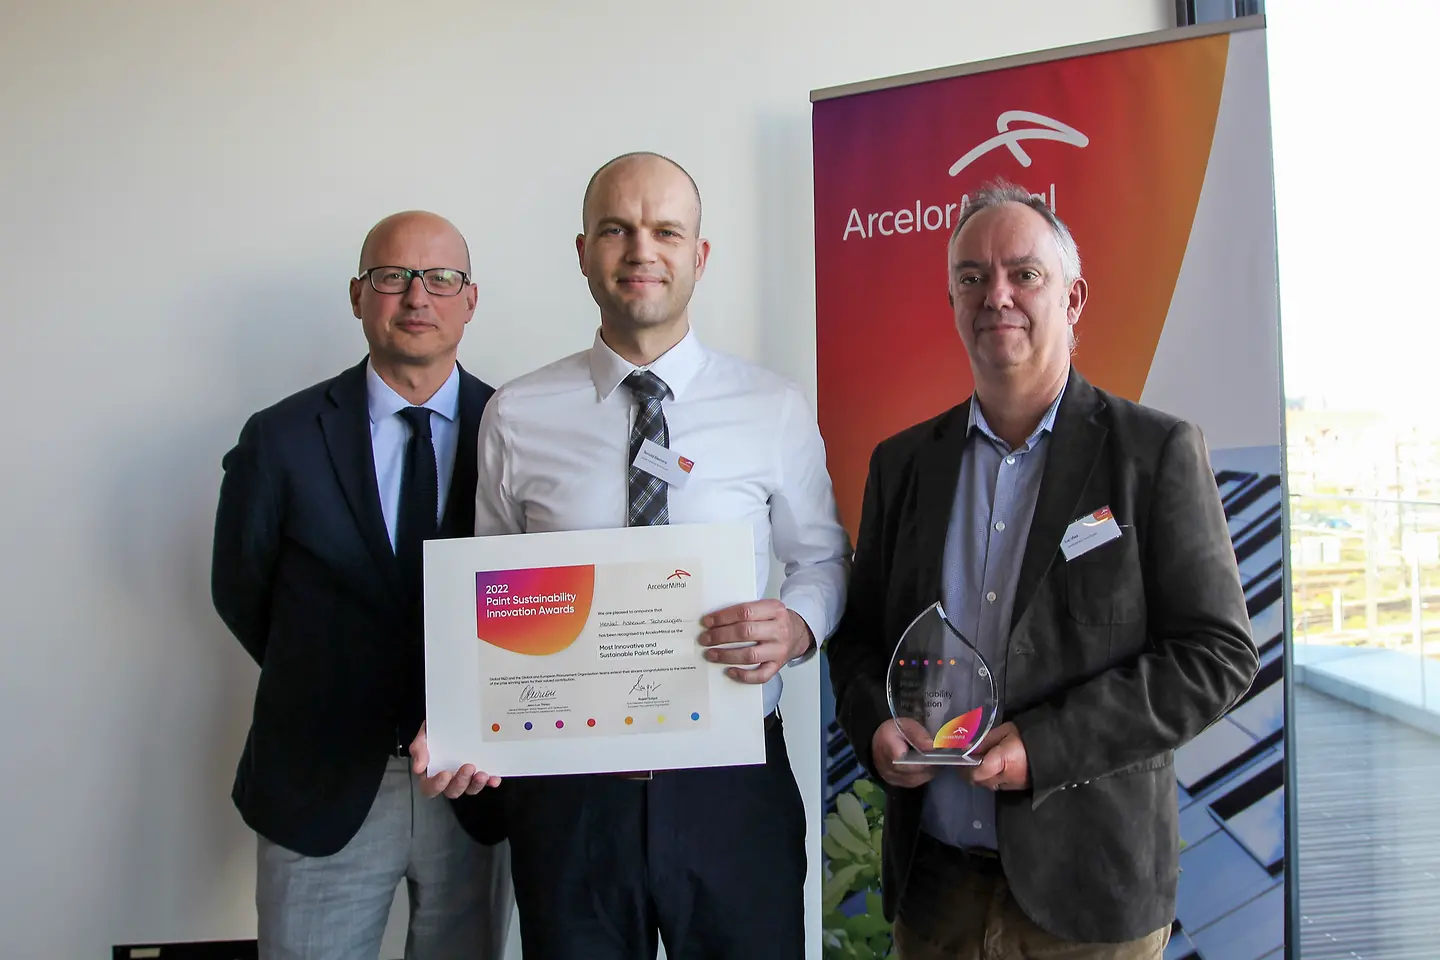 
From left to right: Volker Mansfeld, Vice President Metals EIMEA, Ronald Elemans, Key Account Manager Metal Coil, and Luc Vliex, Global Key Account Manager, receive the Paint Sustainability Innovation Award from customer ArcelorMittal on behalf of Adhesive Technologies.